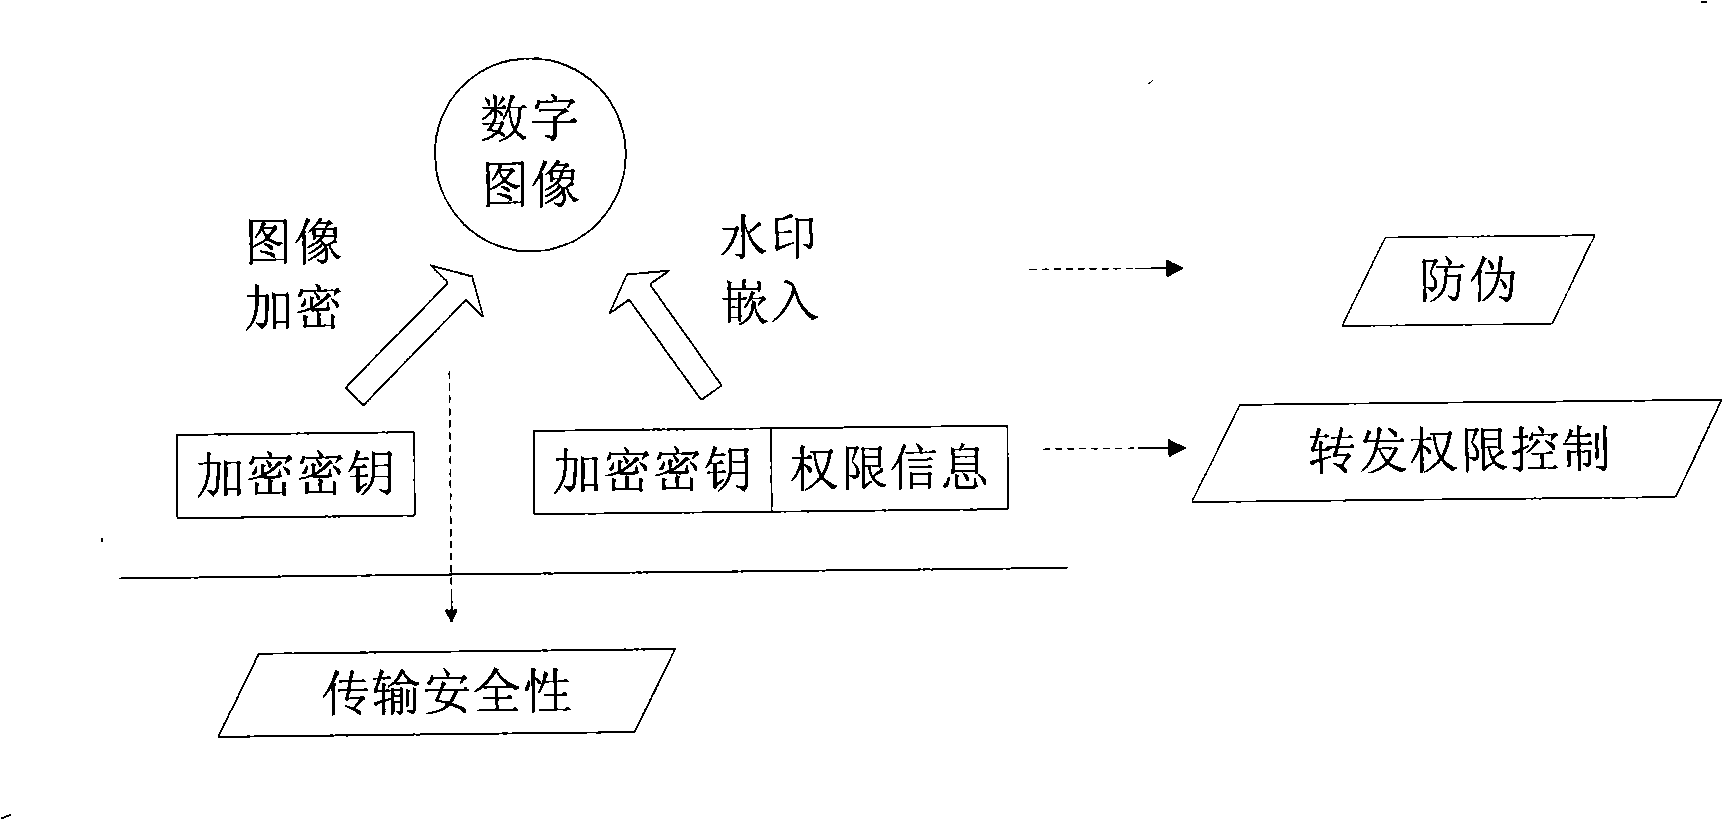 Method for transmitting and receiving image series digital content as well as transmitter and receiver